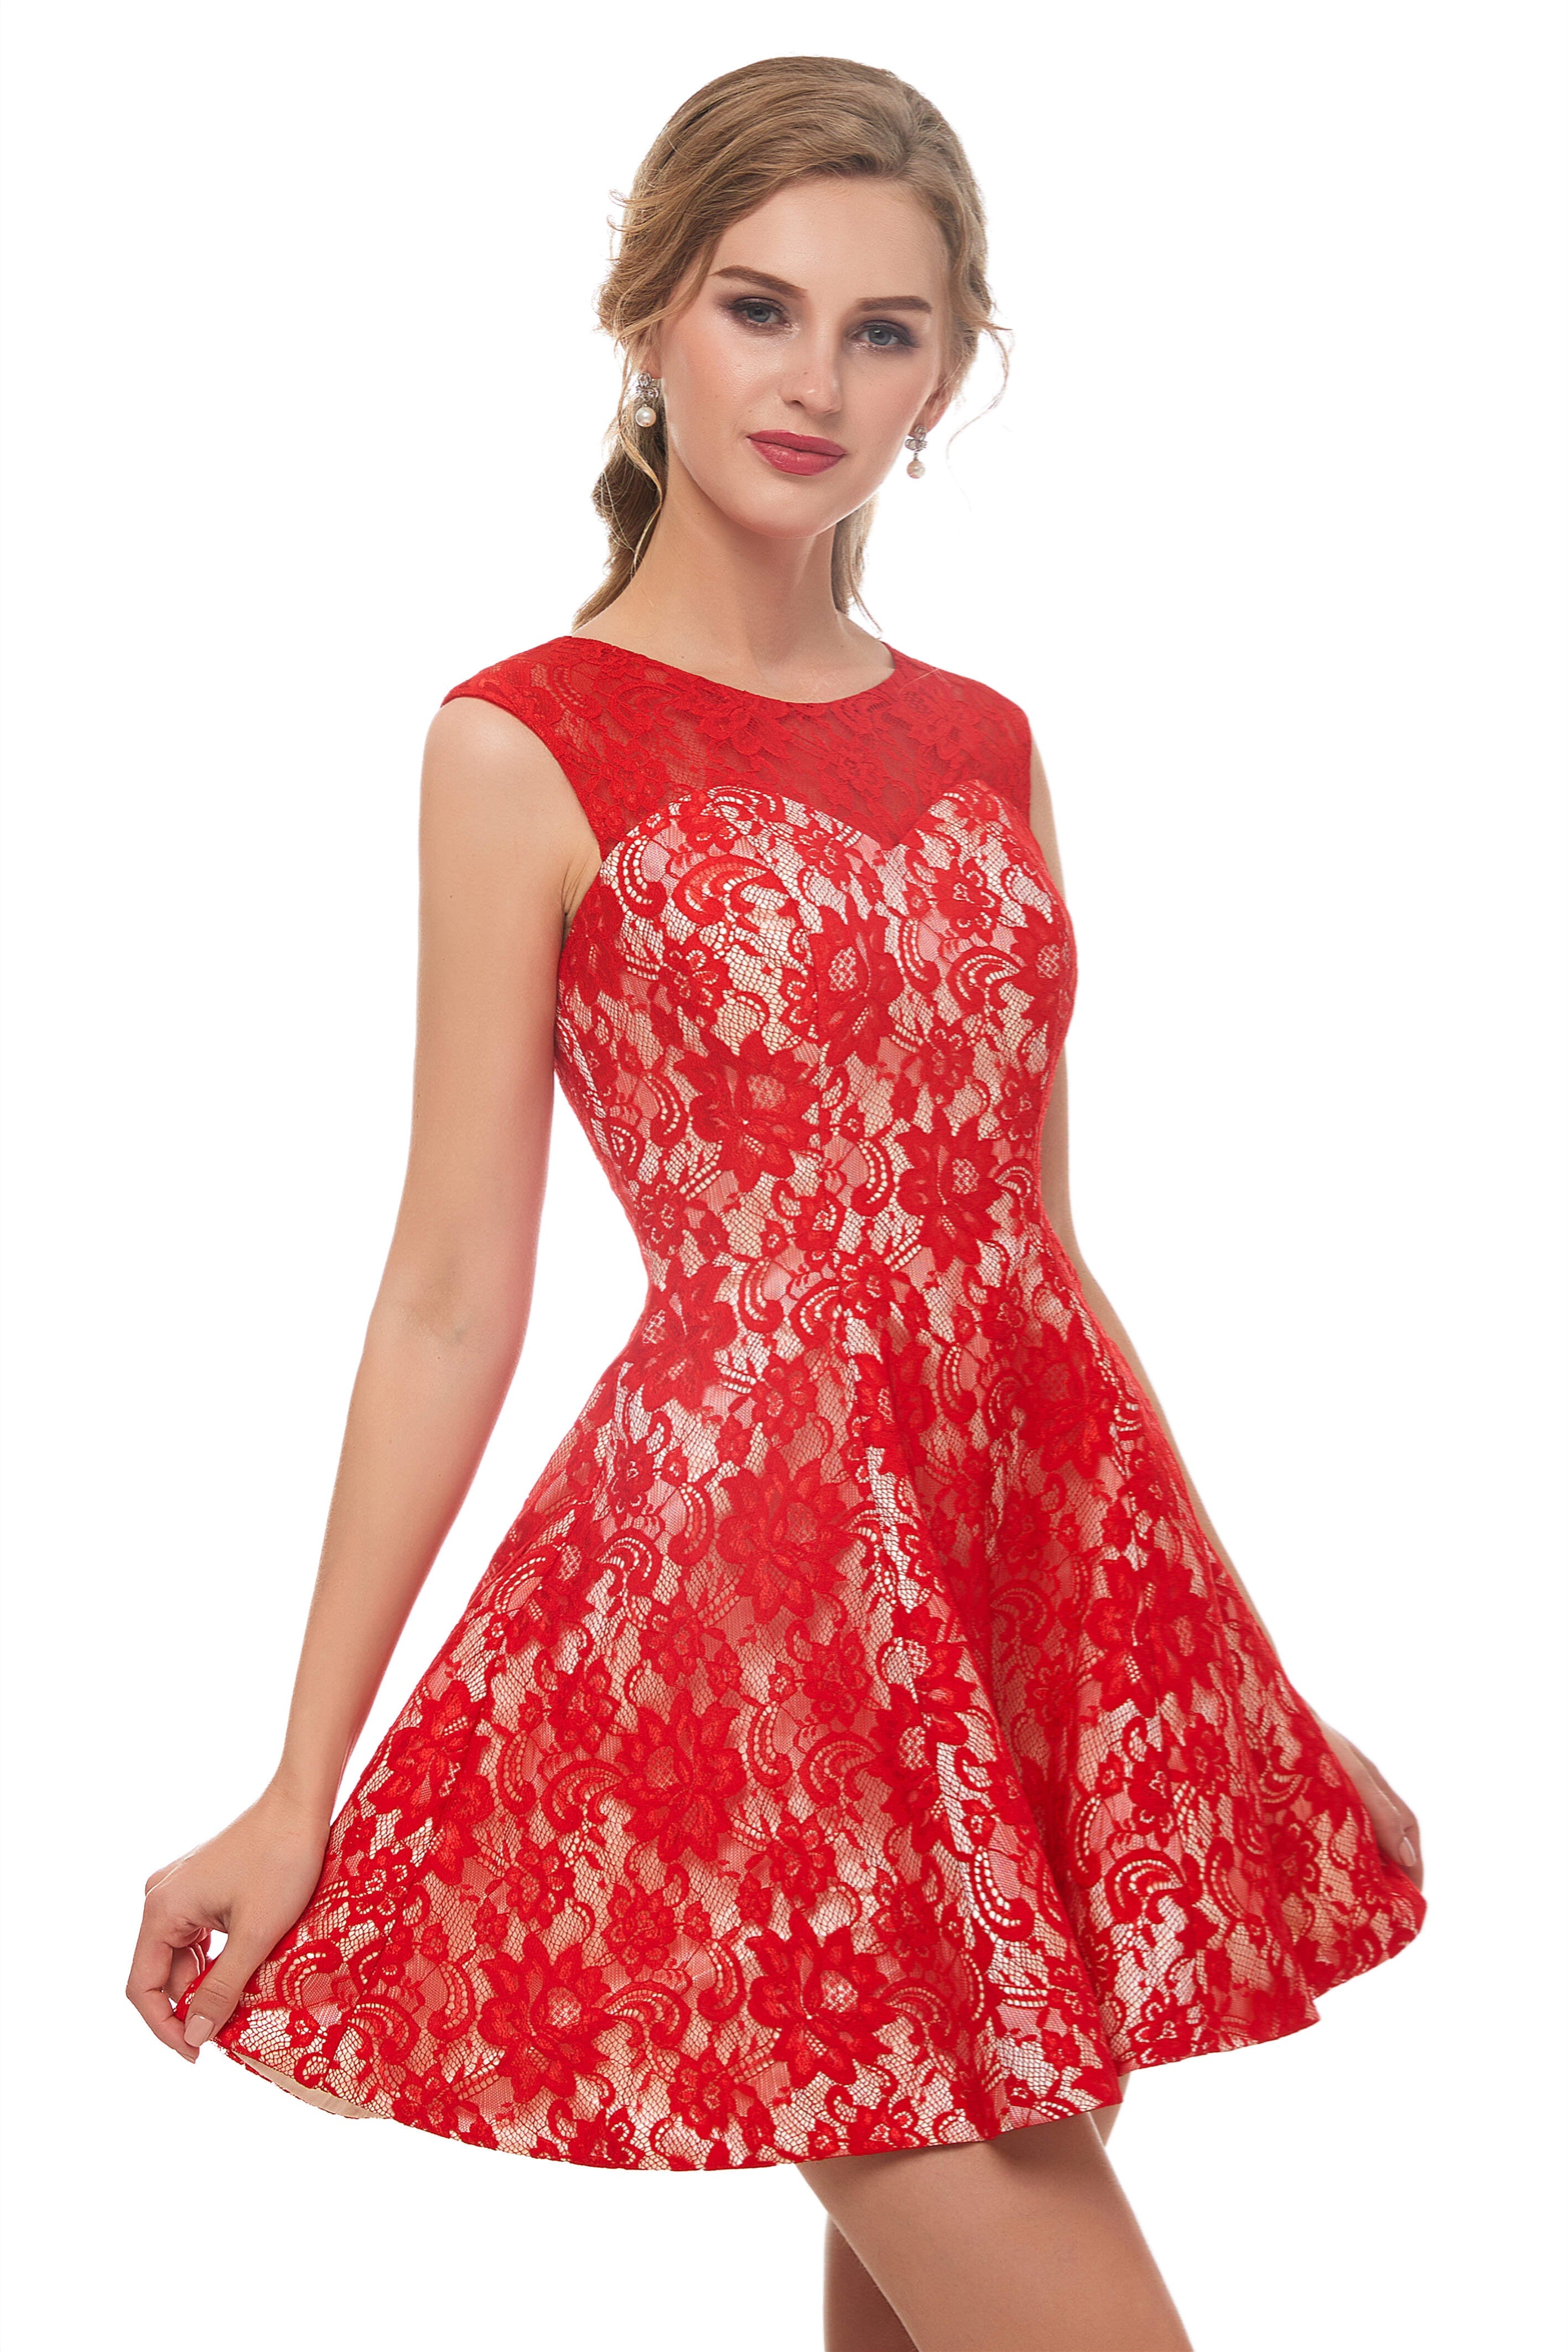 Evening Dress Knee Length, A-Line Red Lace Sleeveless Mini Homecoming Dresses